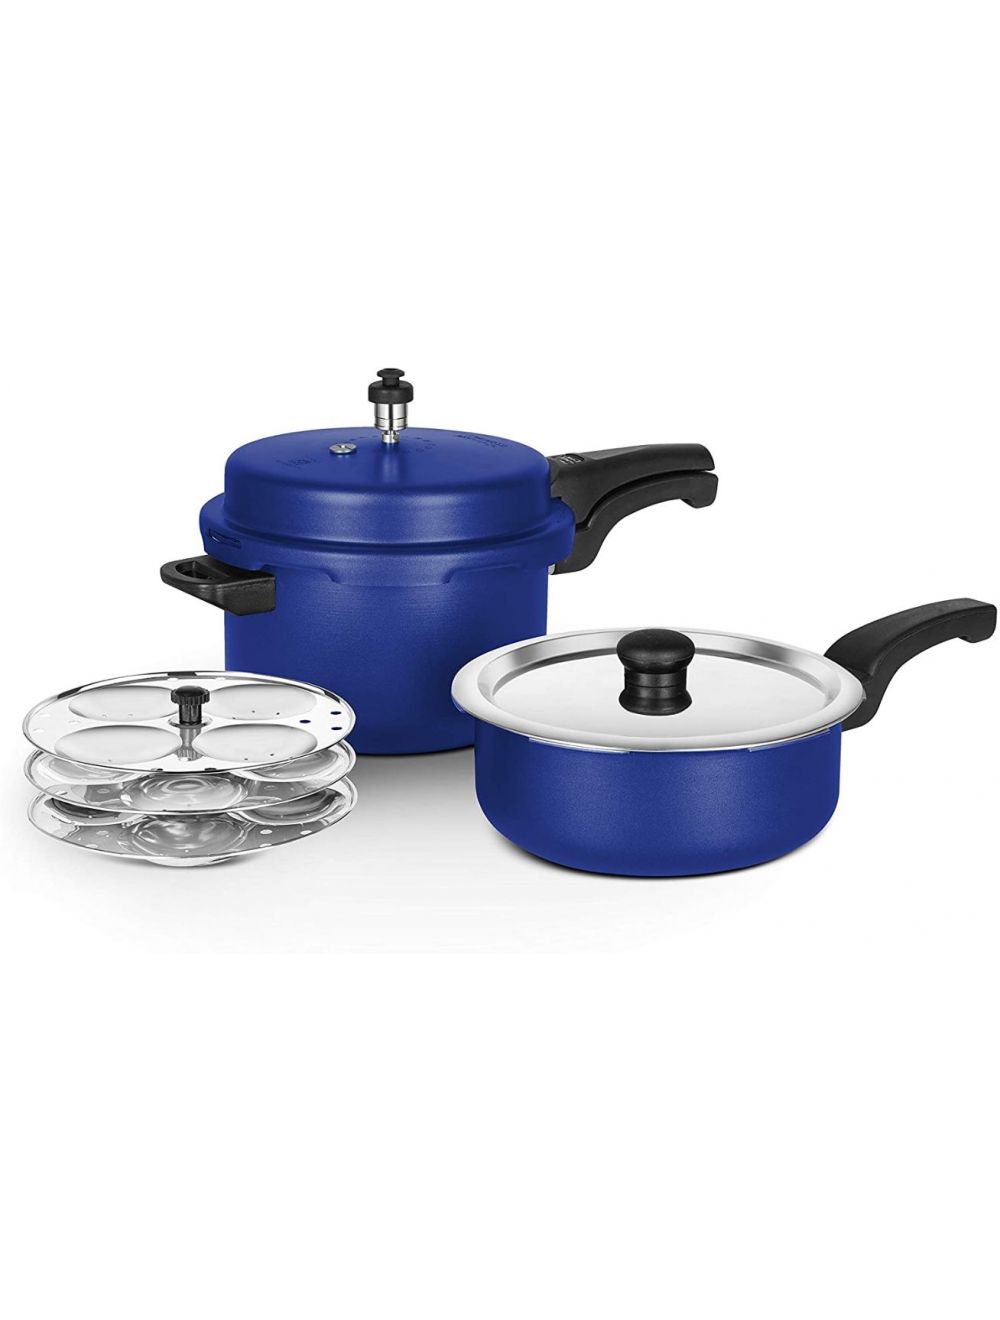 Classic Essentials Orchid 5 Ltr Color Pr. Cooker +3 Ltr Color Pan with idli stand